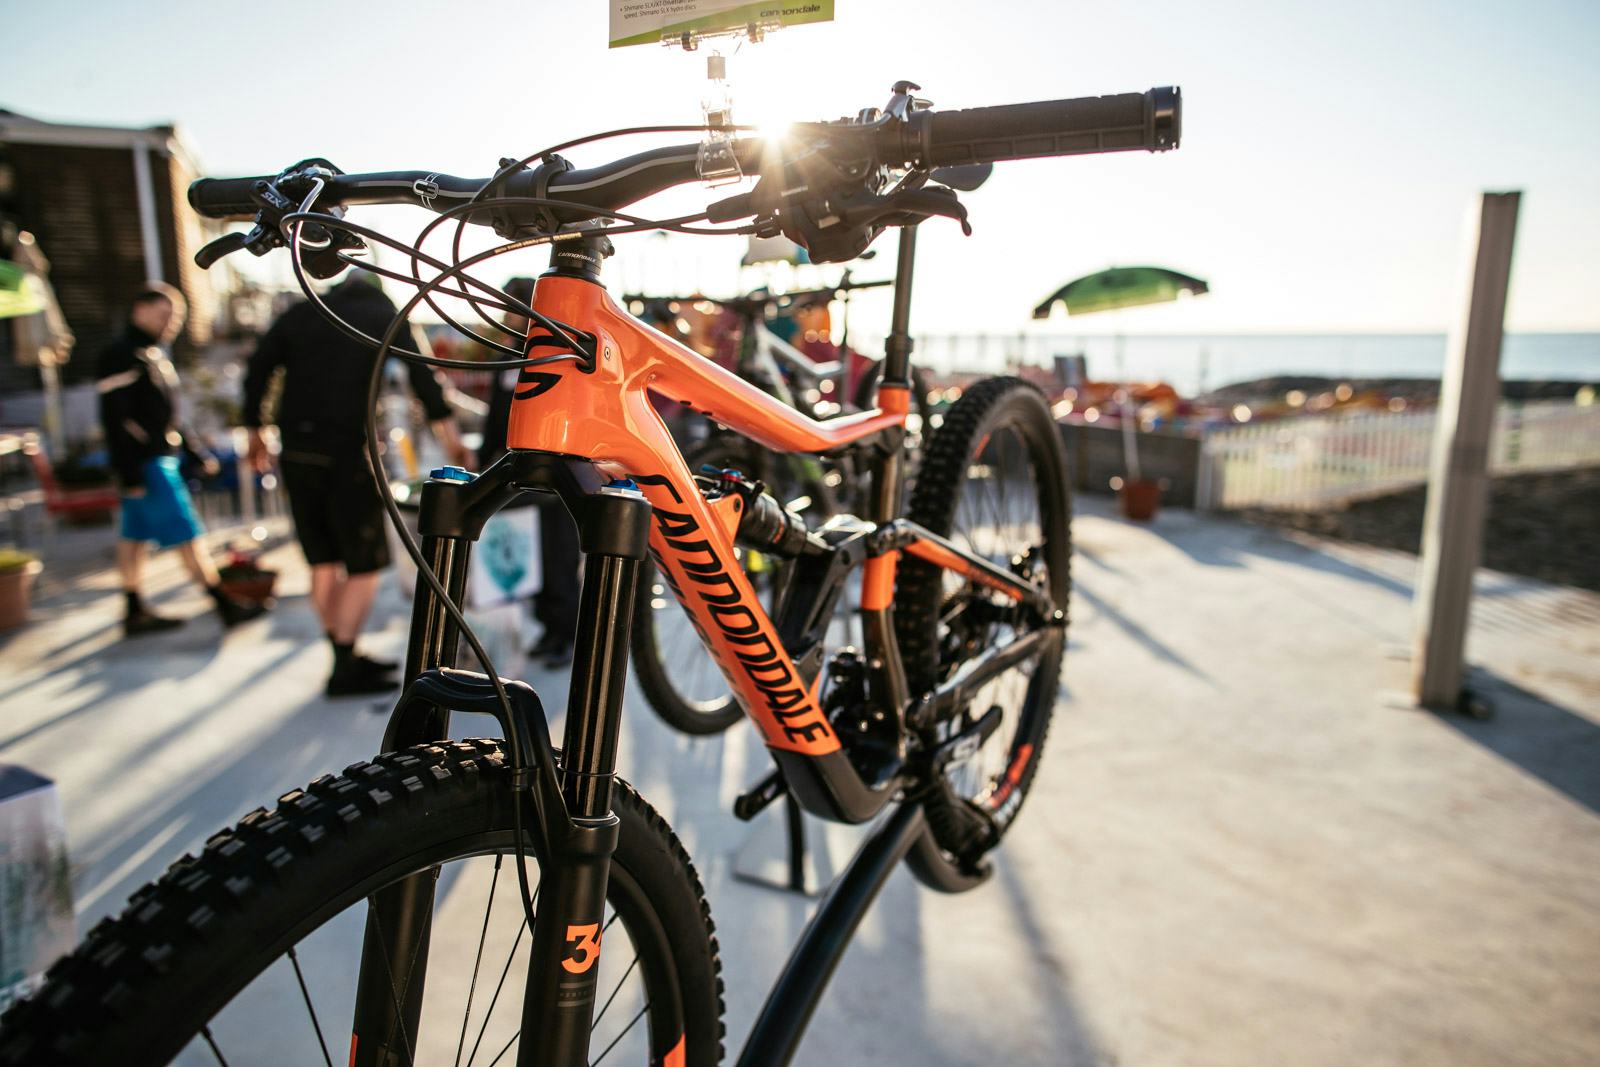 In Dorel Sports demand for bikes accelerated in the last two weeks of March and continued into April, as families looked for outdoor activities that respected social distancing guidelines. - Photo Ale Di Lullo 